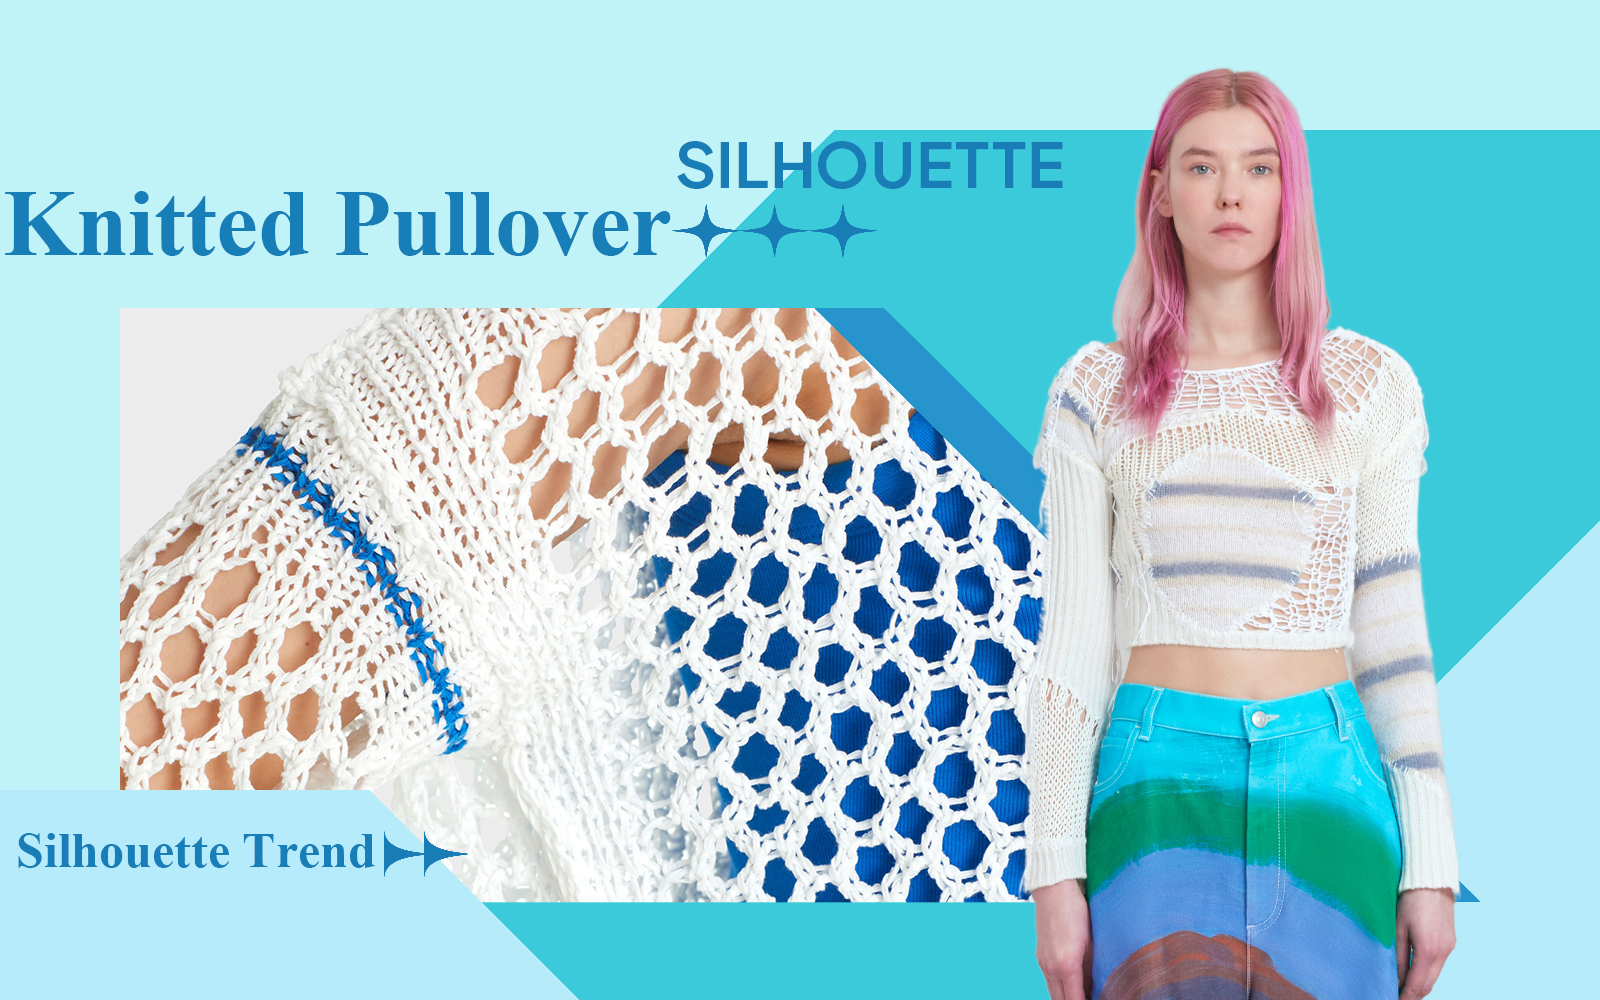 Pullover -- S/S 2024 Silhouette Trend for Women's Knitwear